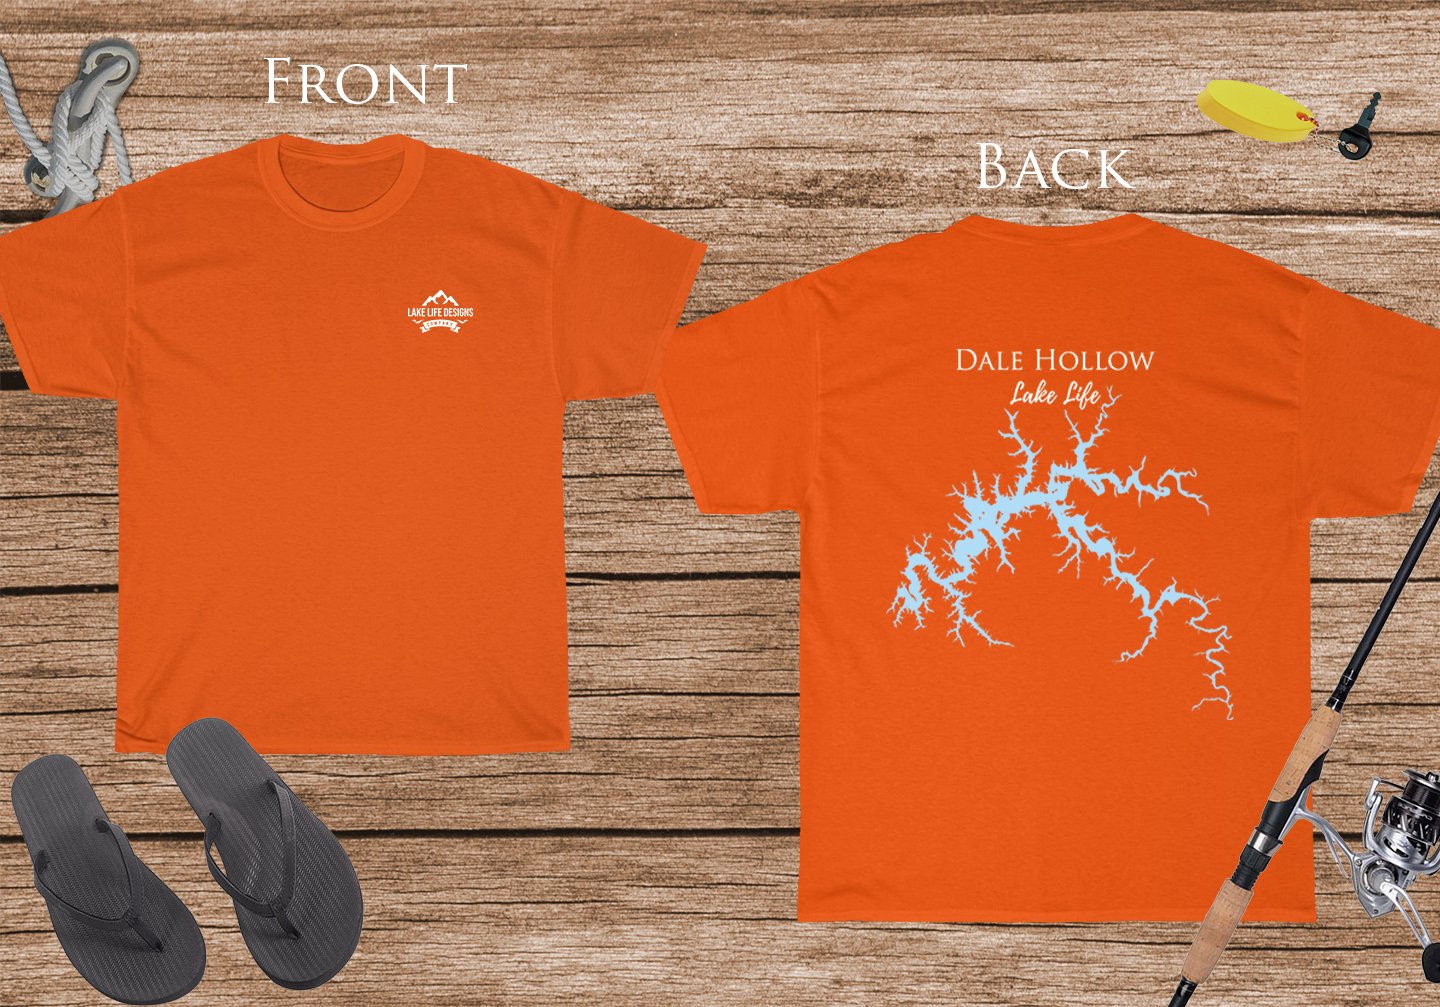 Dale Hollow Lake Life - Cotton Short Sleeved - FRONT & BACK PRINTED - Short Sleeved Cotton Tee - Tennessee Lake